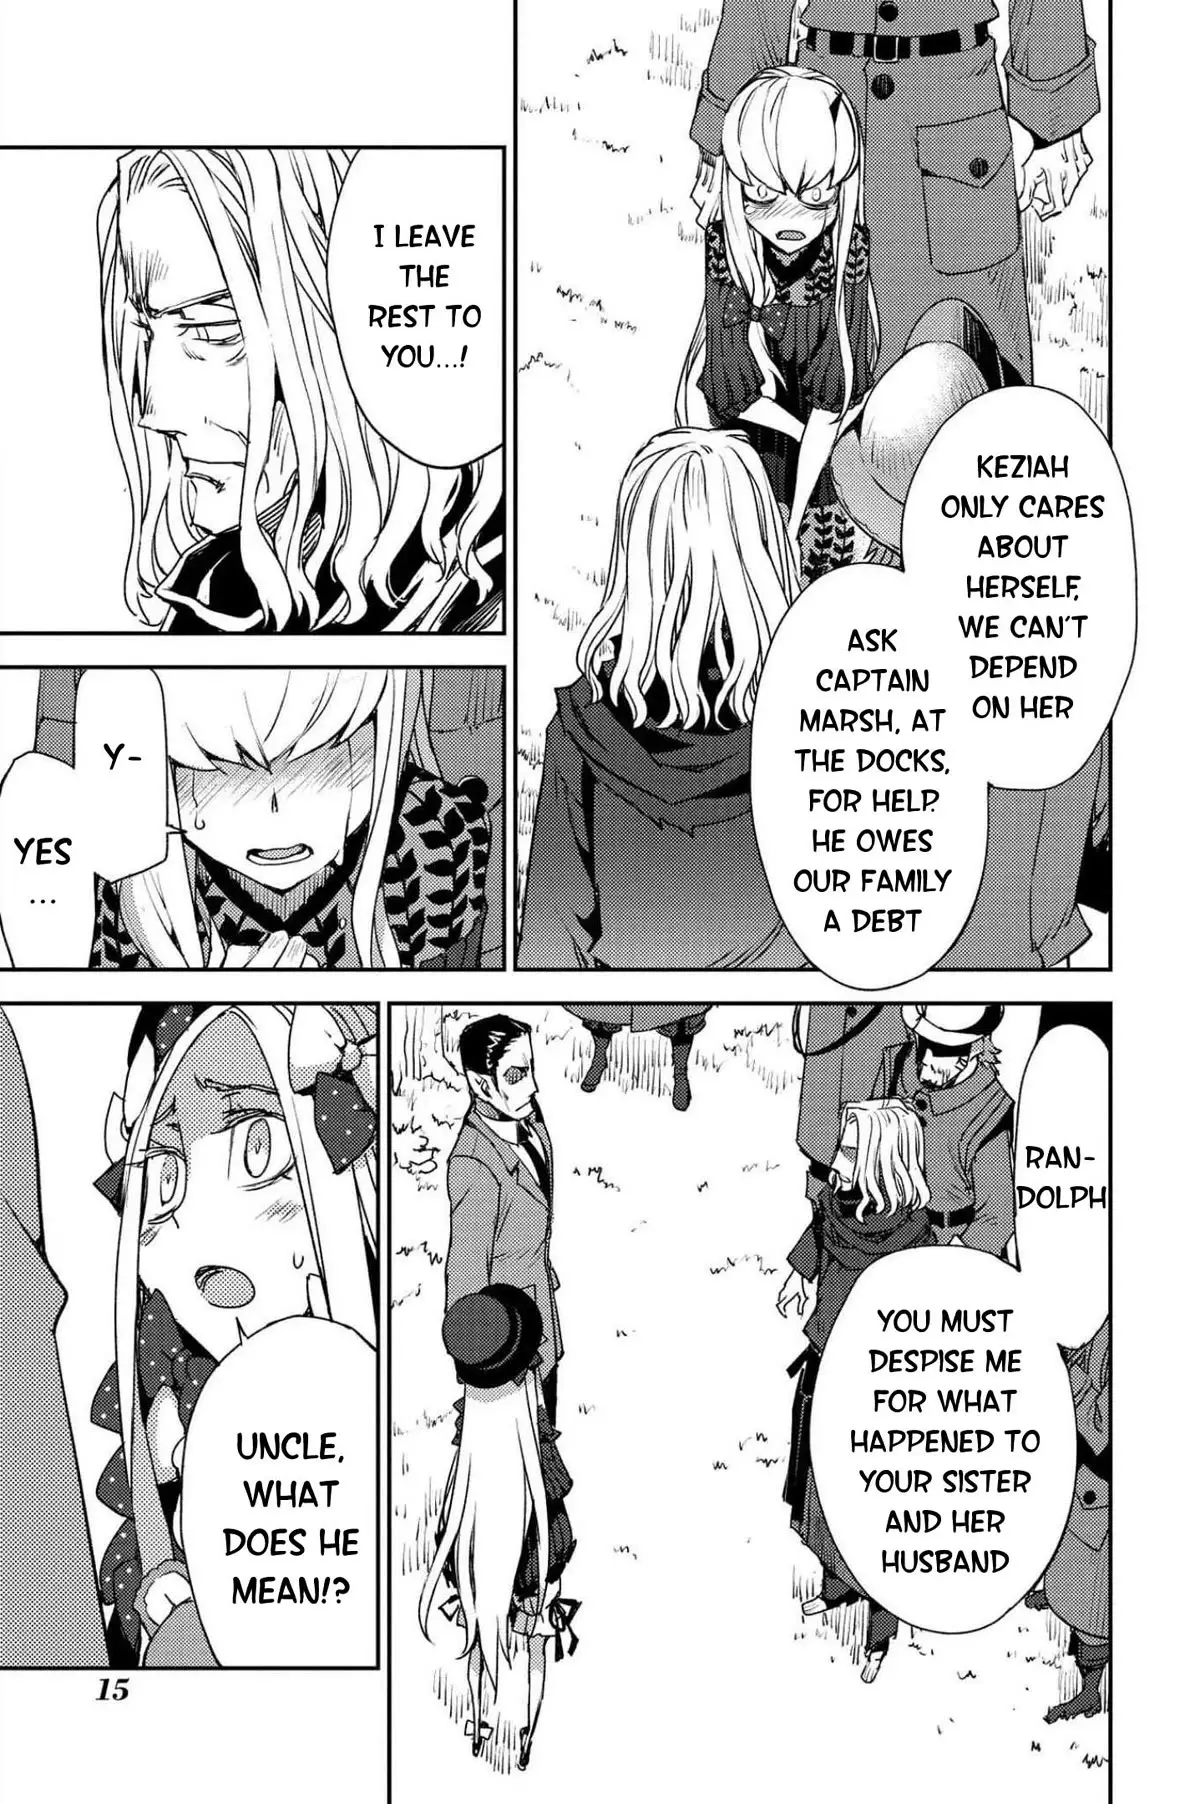 Fate/grand Order: Epic Of Remnant - Subspecies Singularity Iv: Taboo Advent Salem: Salem Of Heresy - 23 page 15-2f584f20